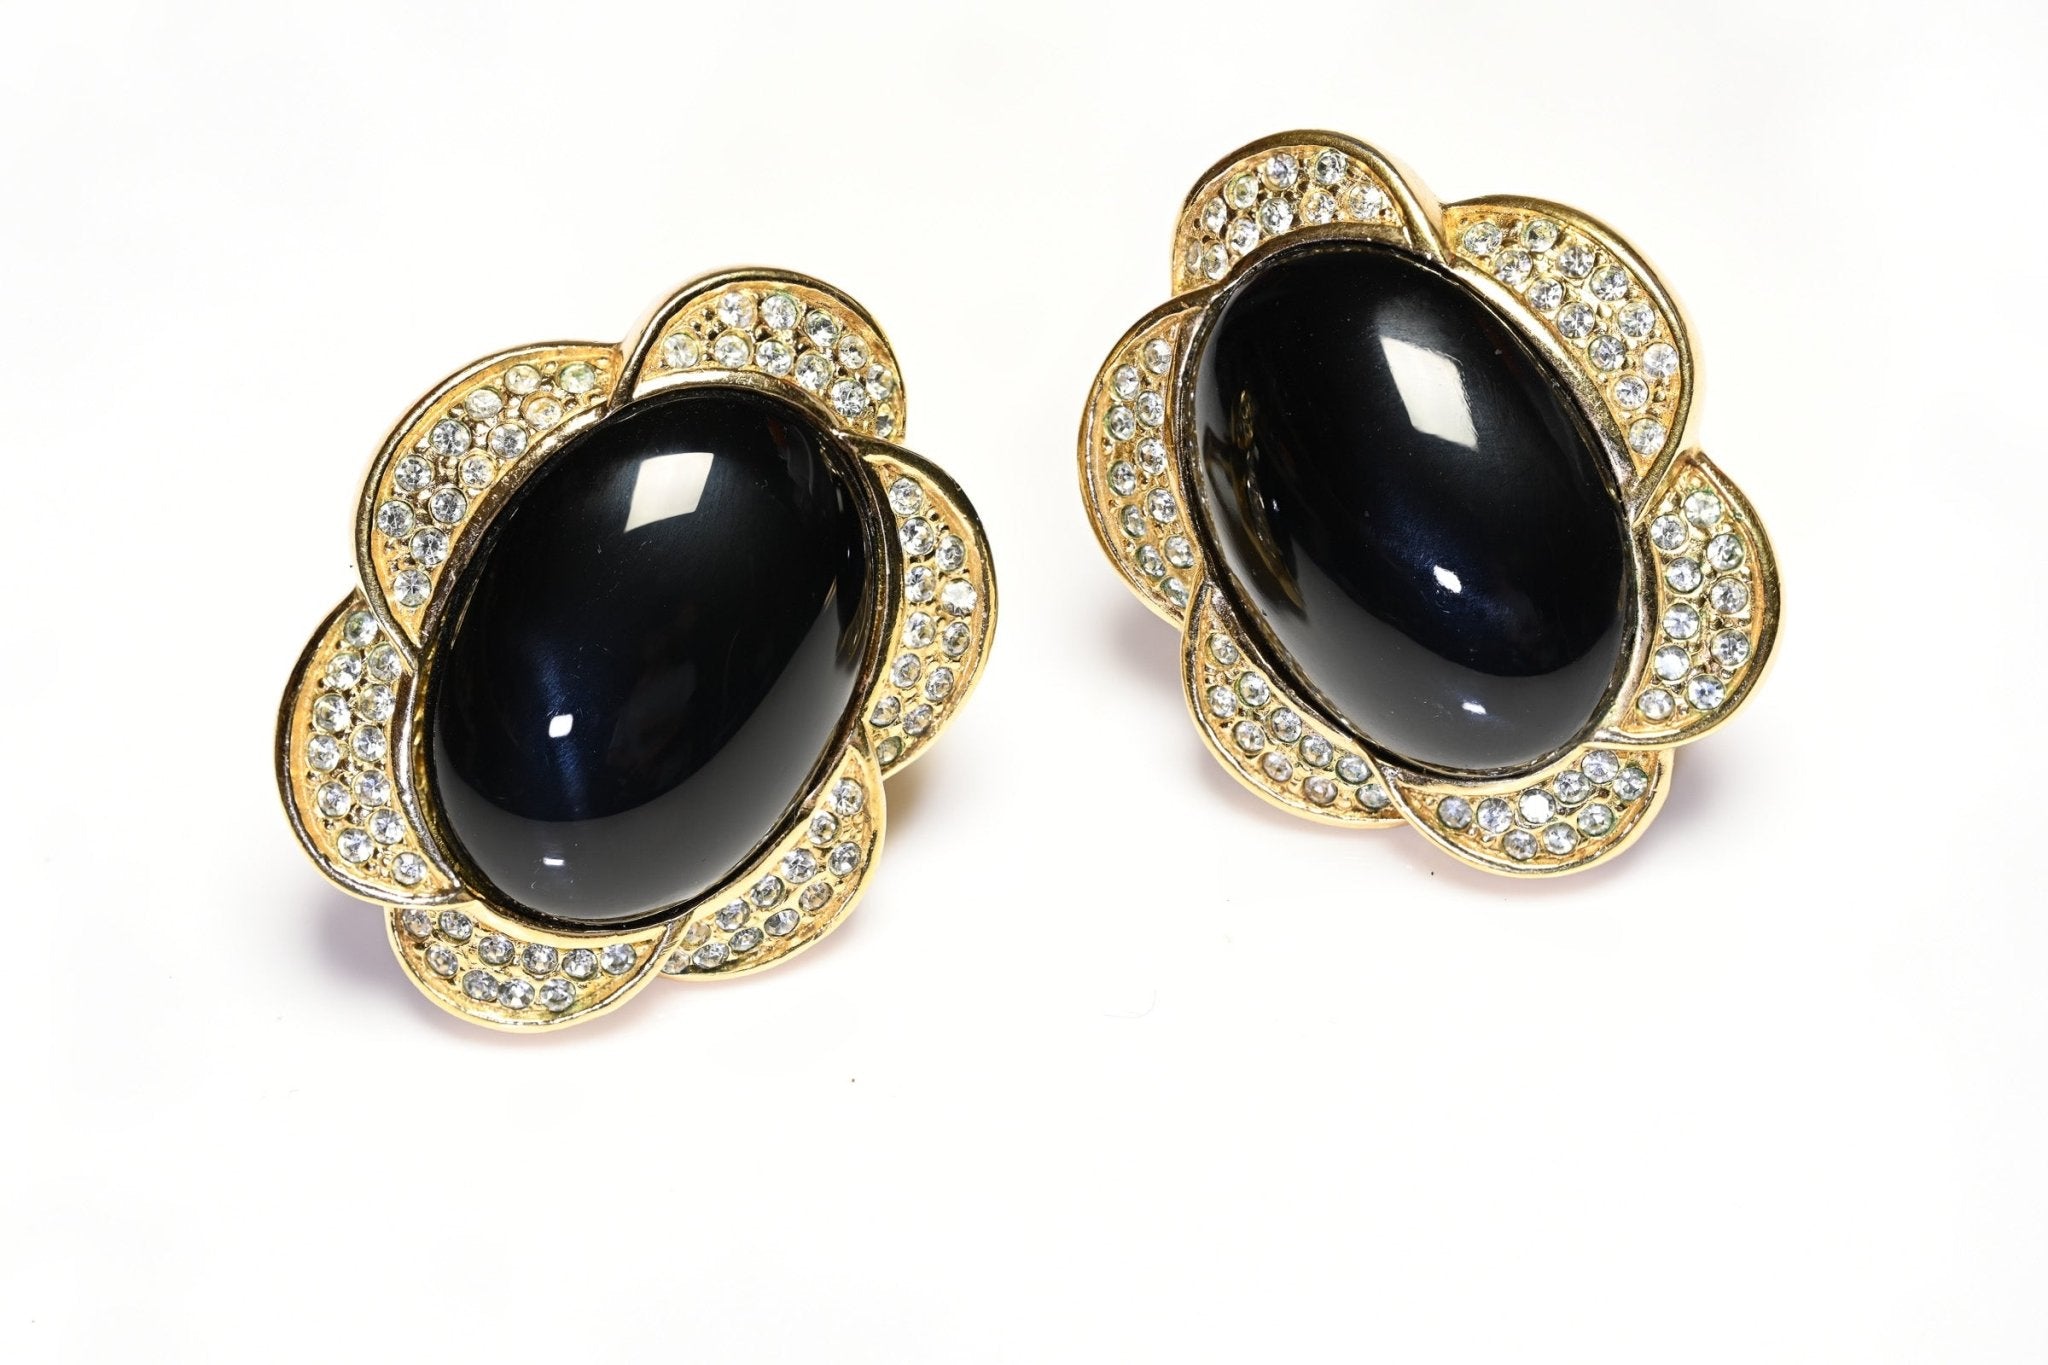 Vintage Christian Dior Gold Plated Large Black Cabochon Crystal Flower Earrings